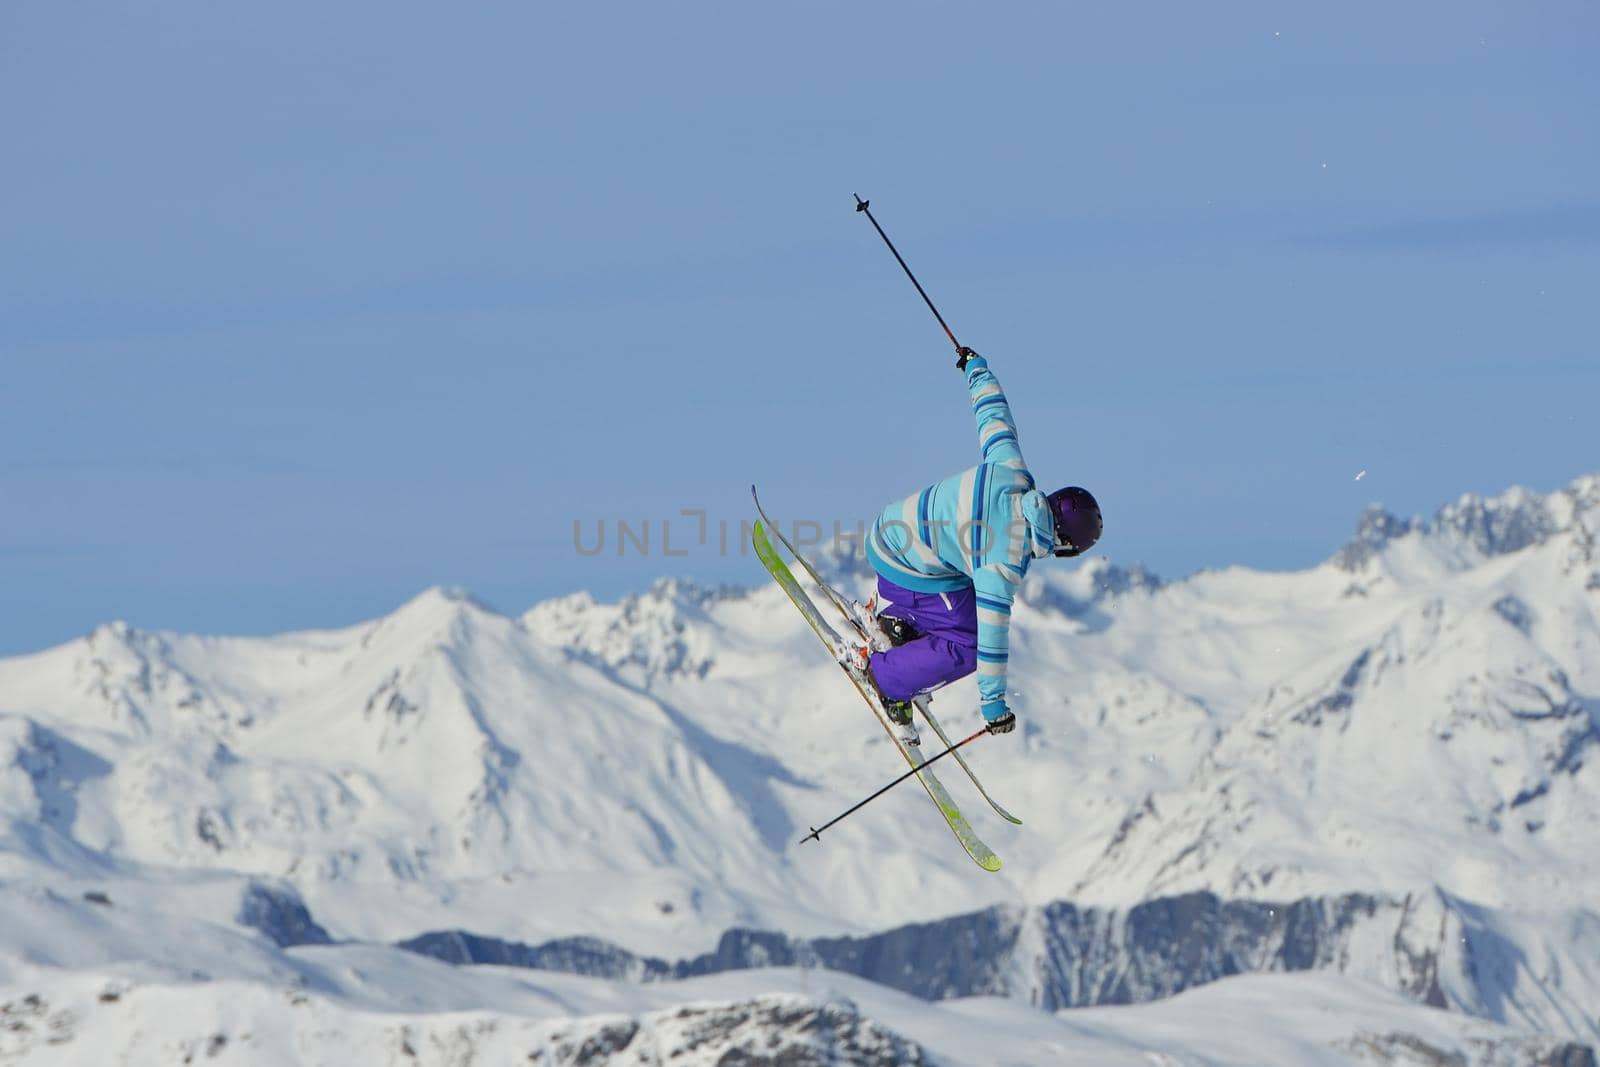 jumping skier at mountain winter snow fresh suny day